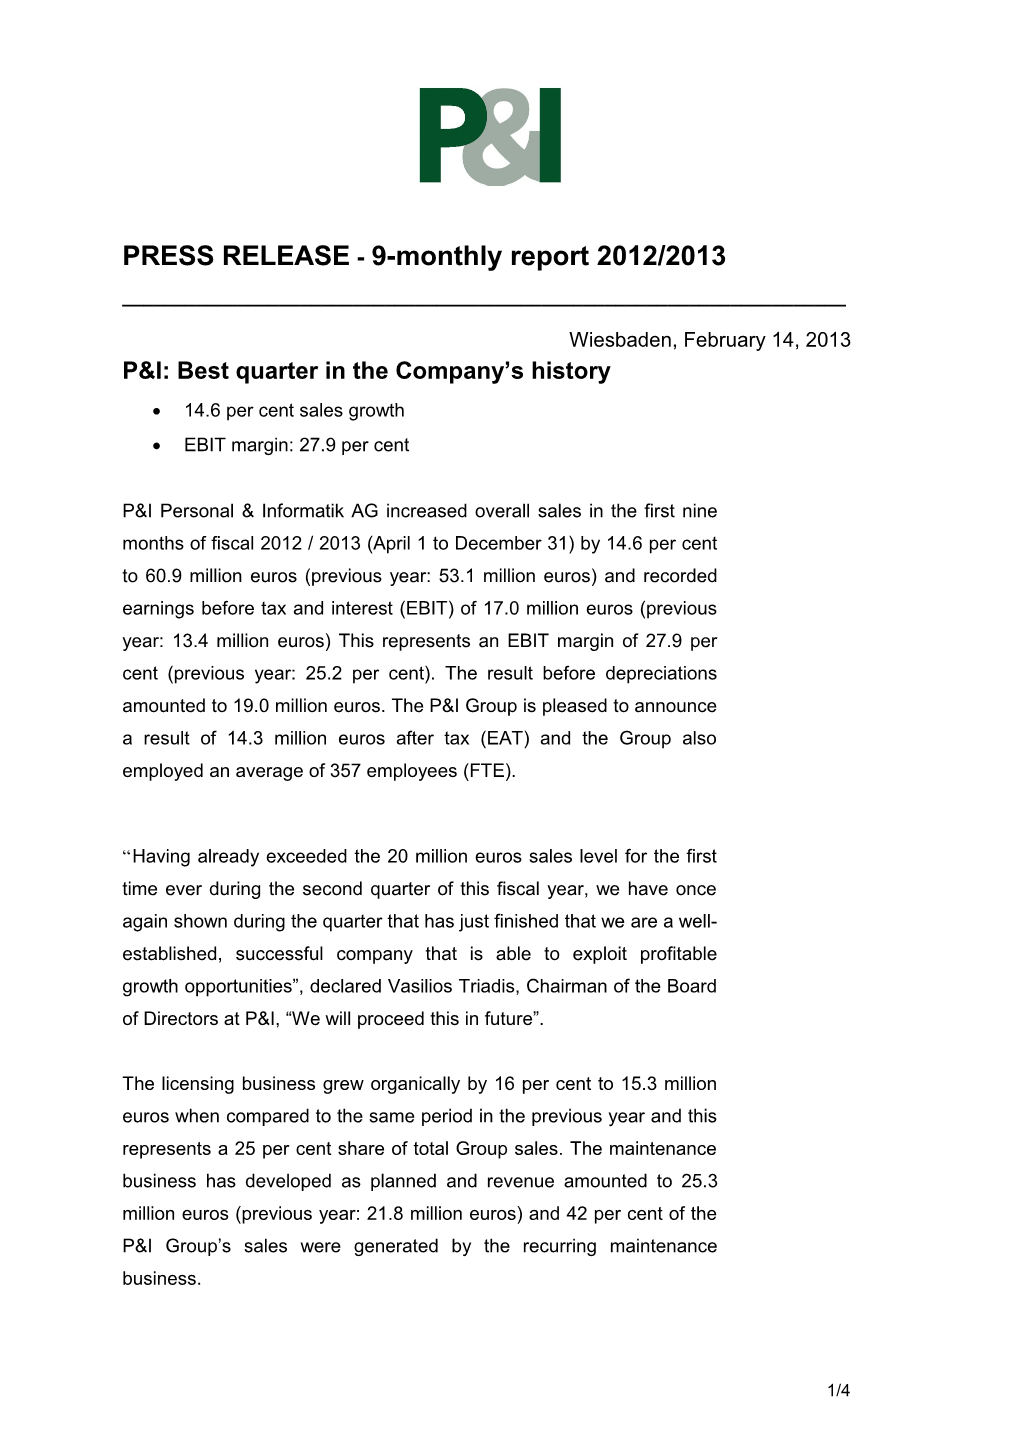 PRESS RELEASE - 9-Monthly Report 2012/2013